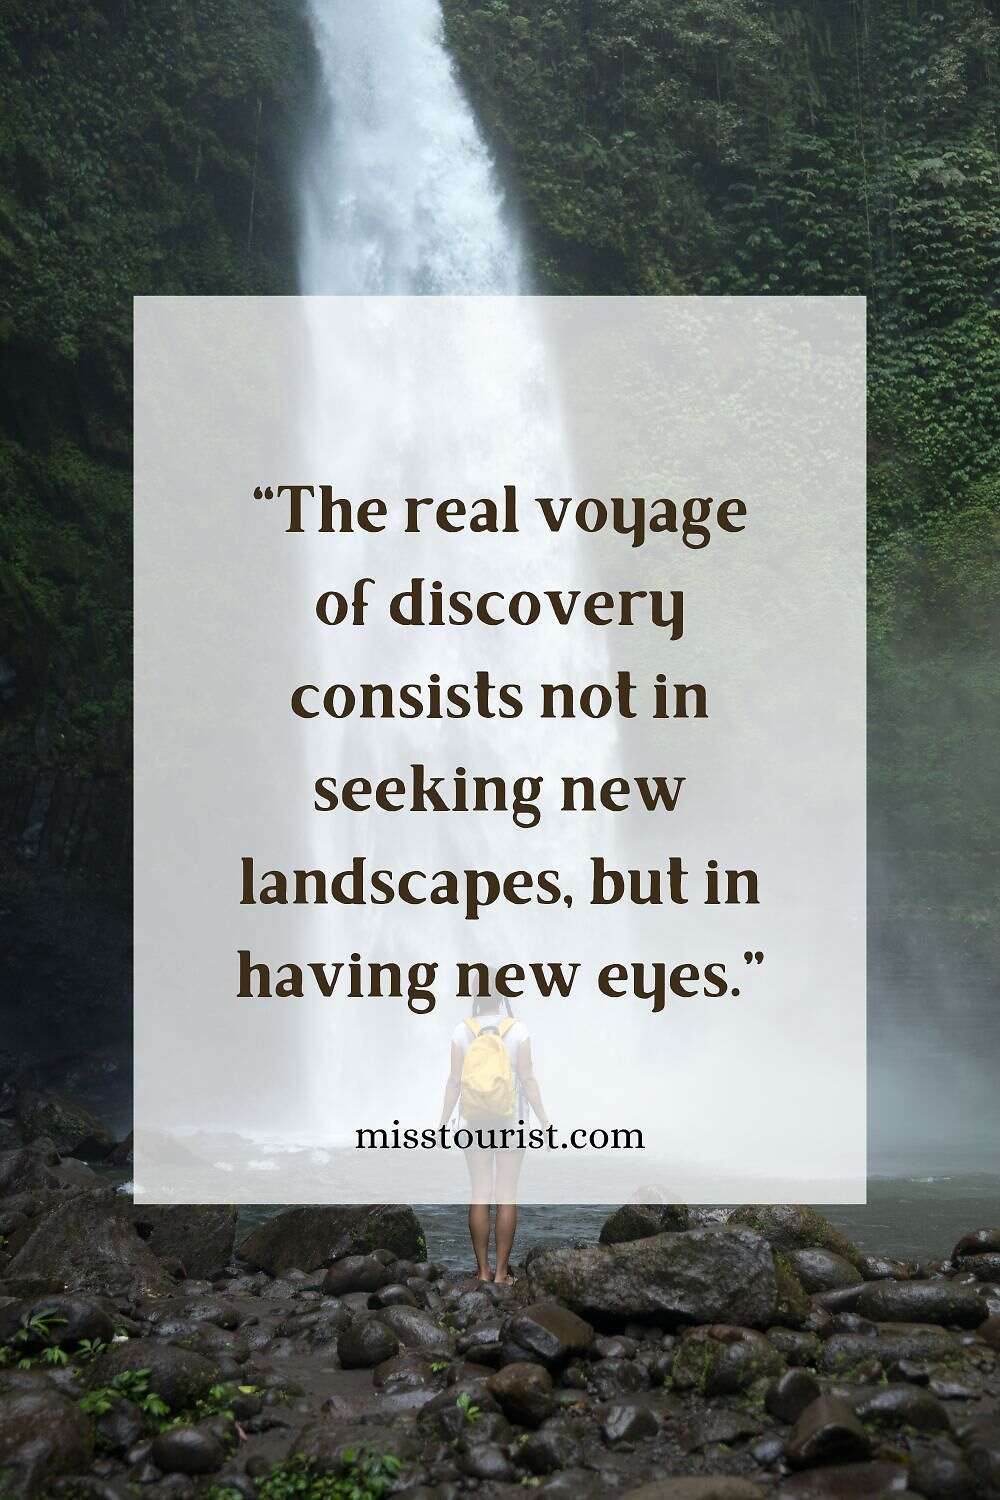 Image of a waterfall with the quote "The real voyage of discovery consists not in seeking new landscapes, but in having new eyes." and the website "misstourist.com" displayed on the image.